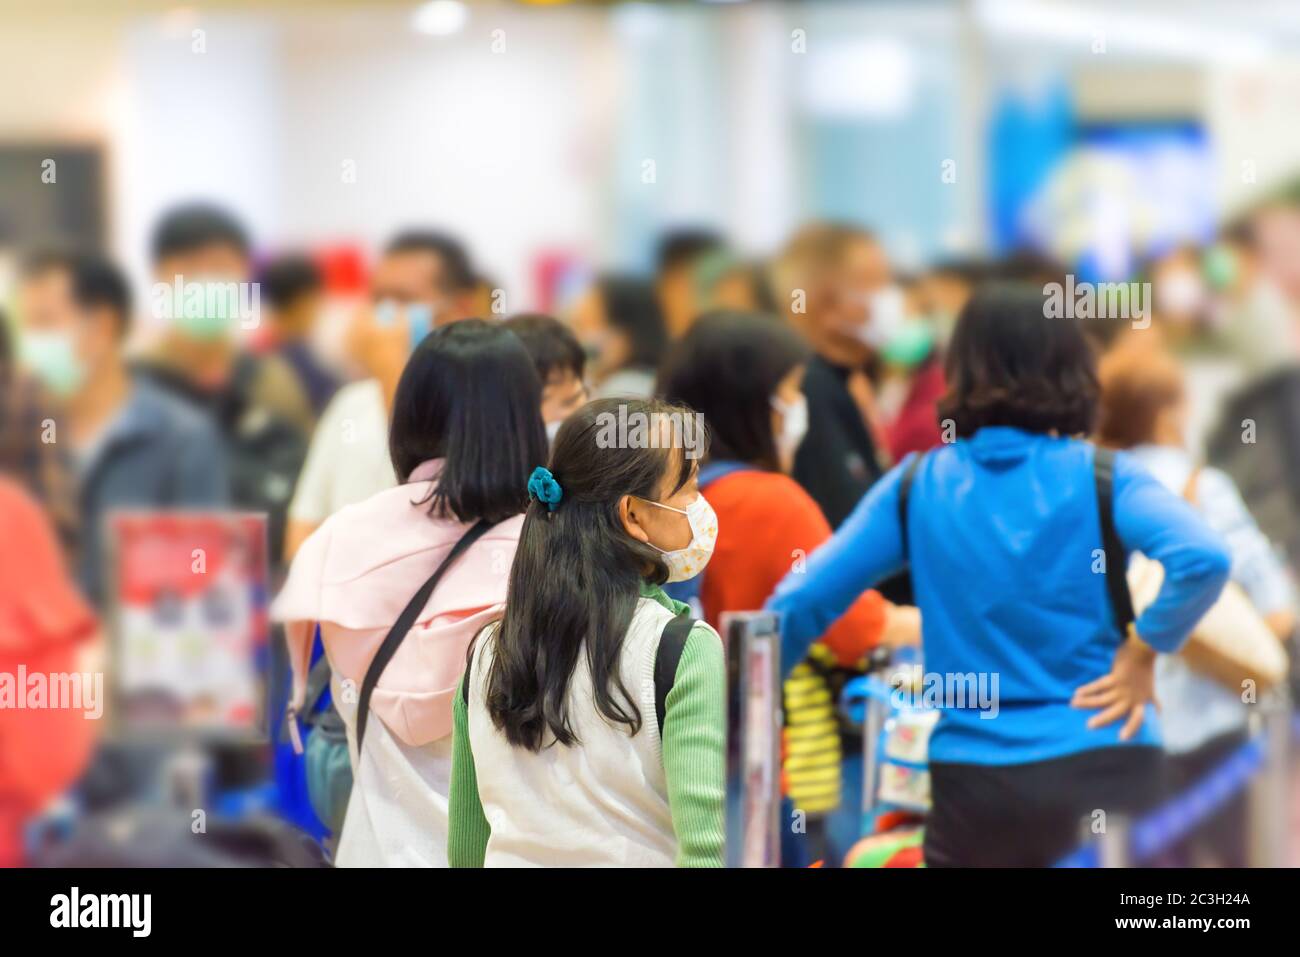 Crowd of people waiting in airport Stock Photo